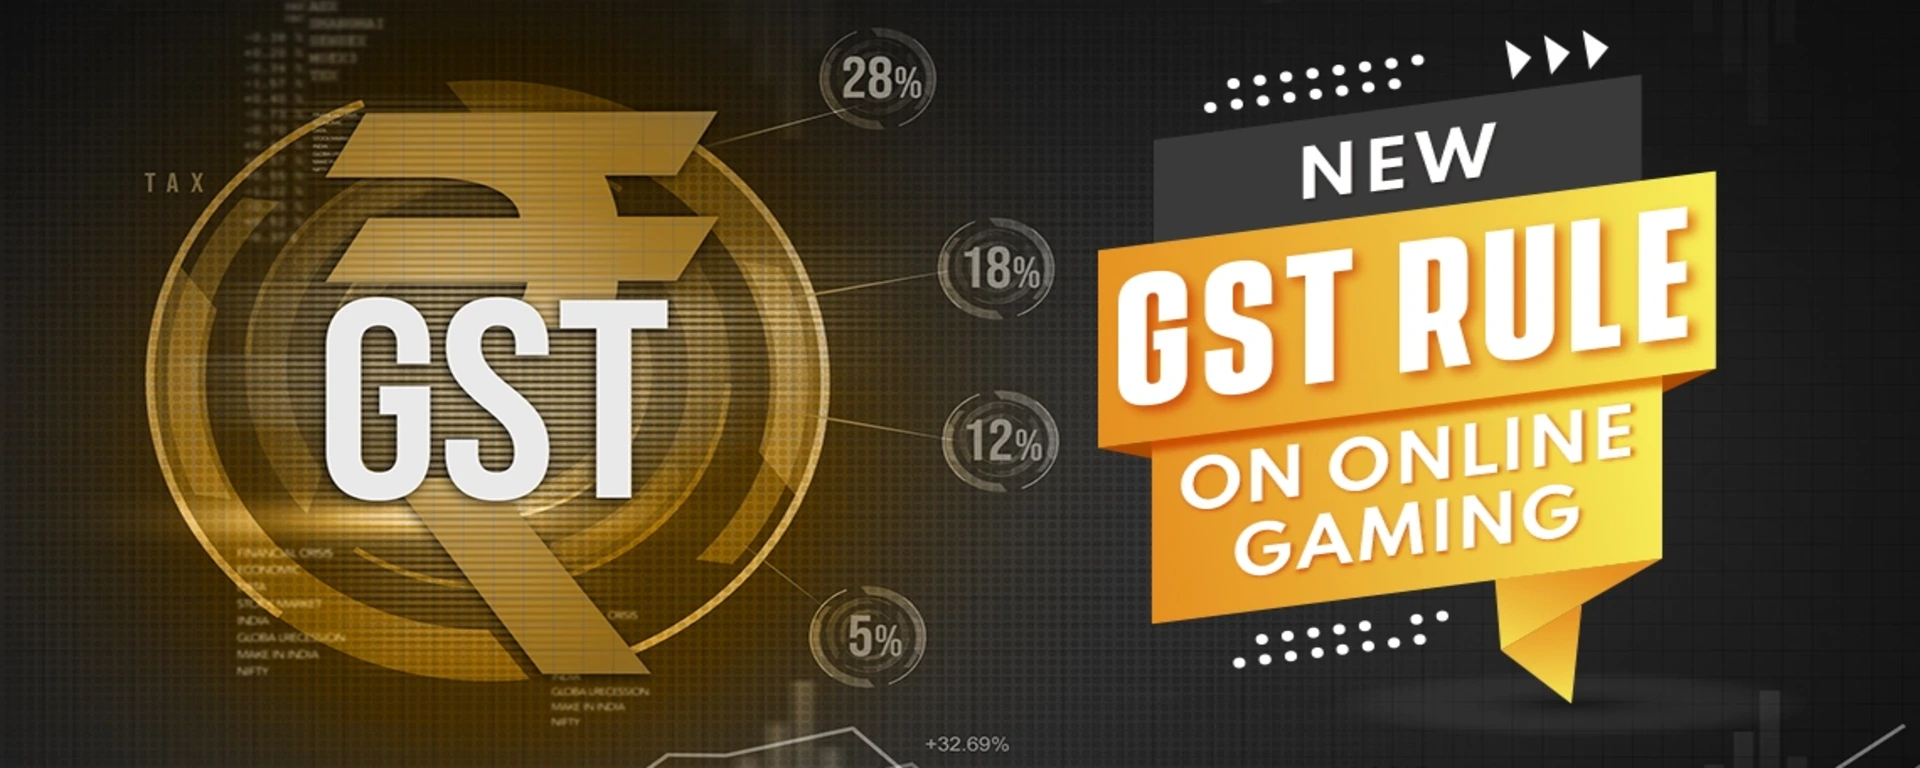 New GST Rule on Online Gaming